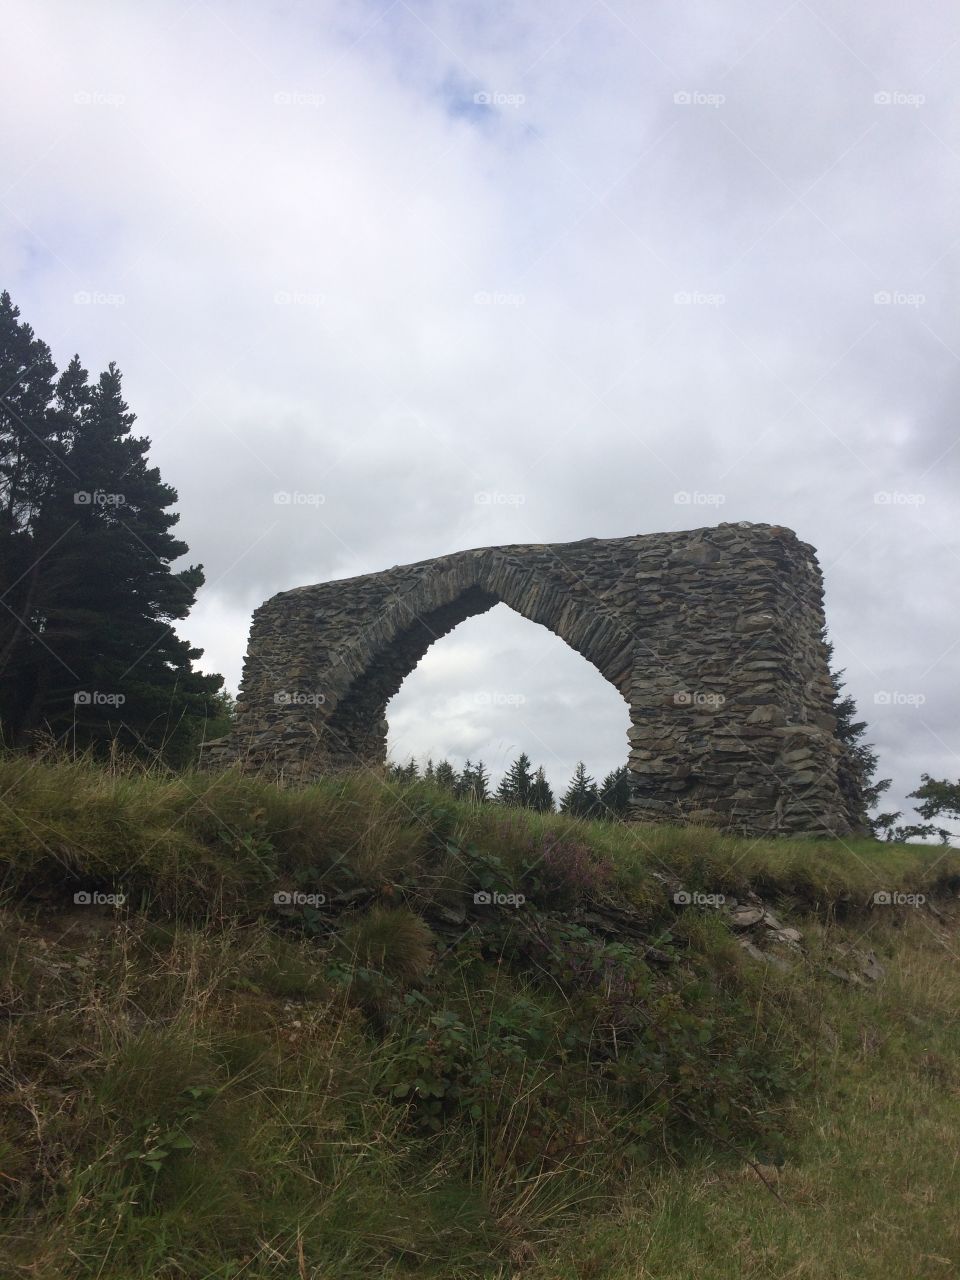 An old bridge on the Welsh countryside